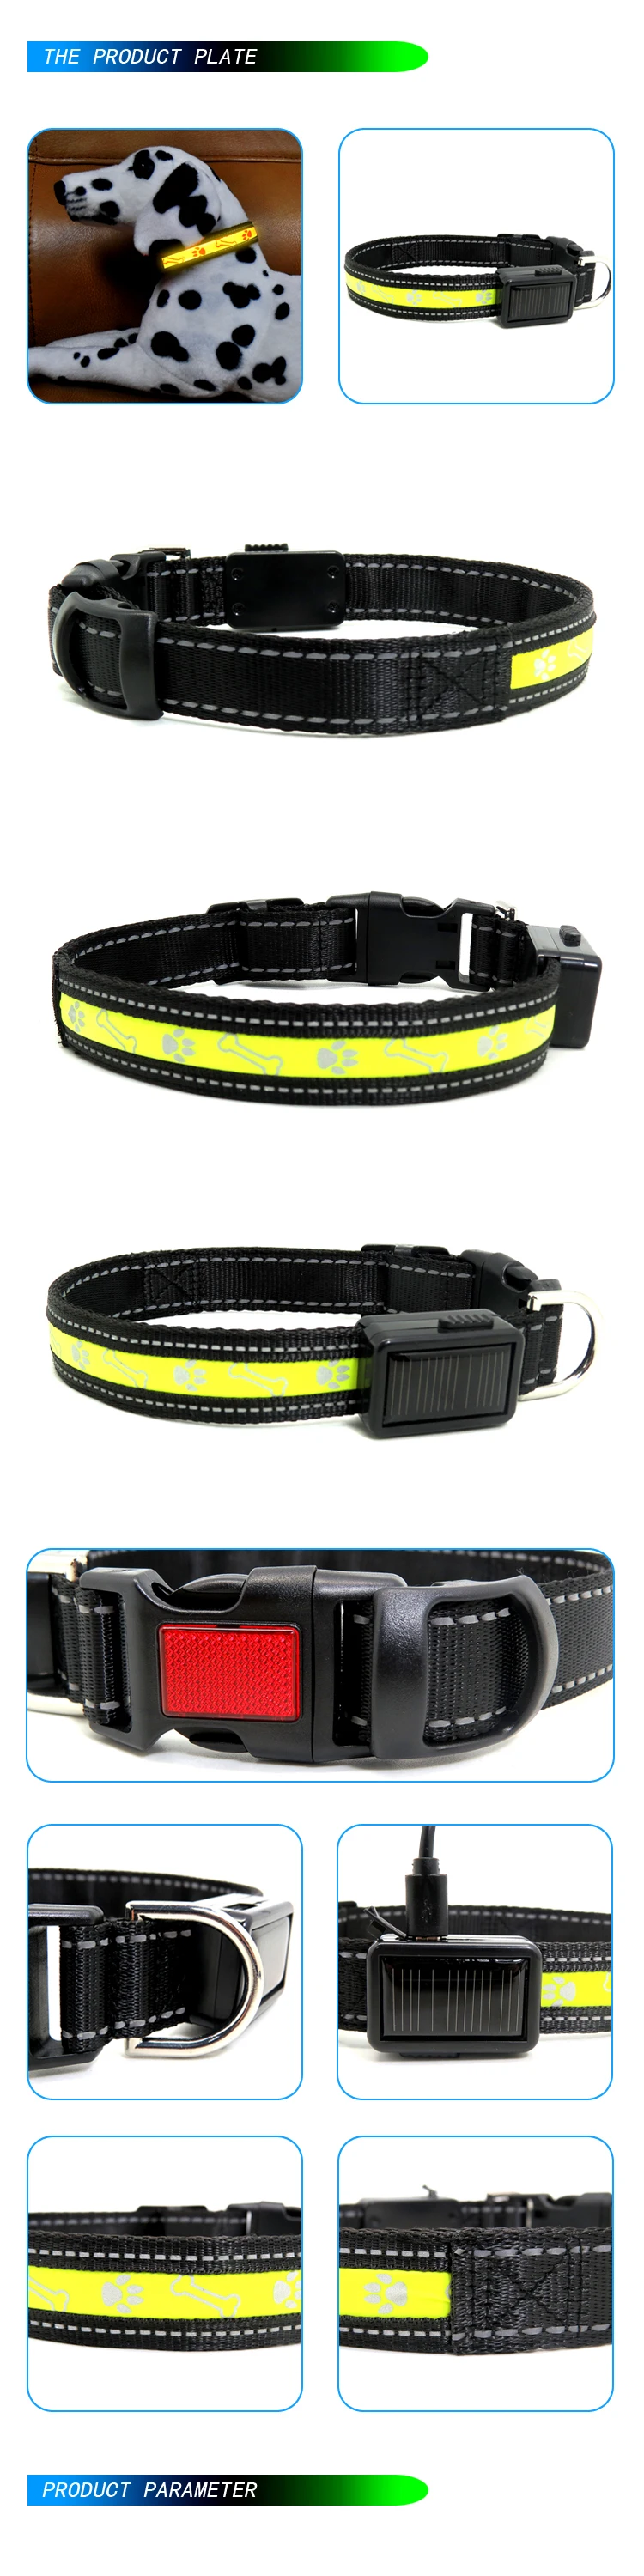 Hot Selling Products led Pet  Collar And Leash For Puppy cute dog collar